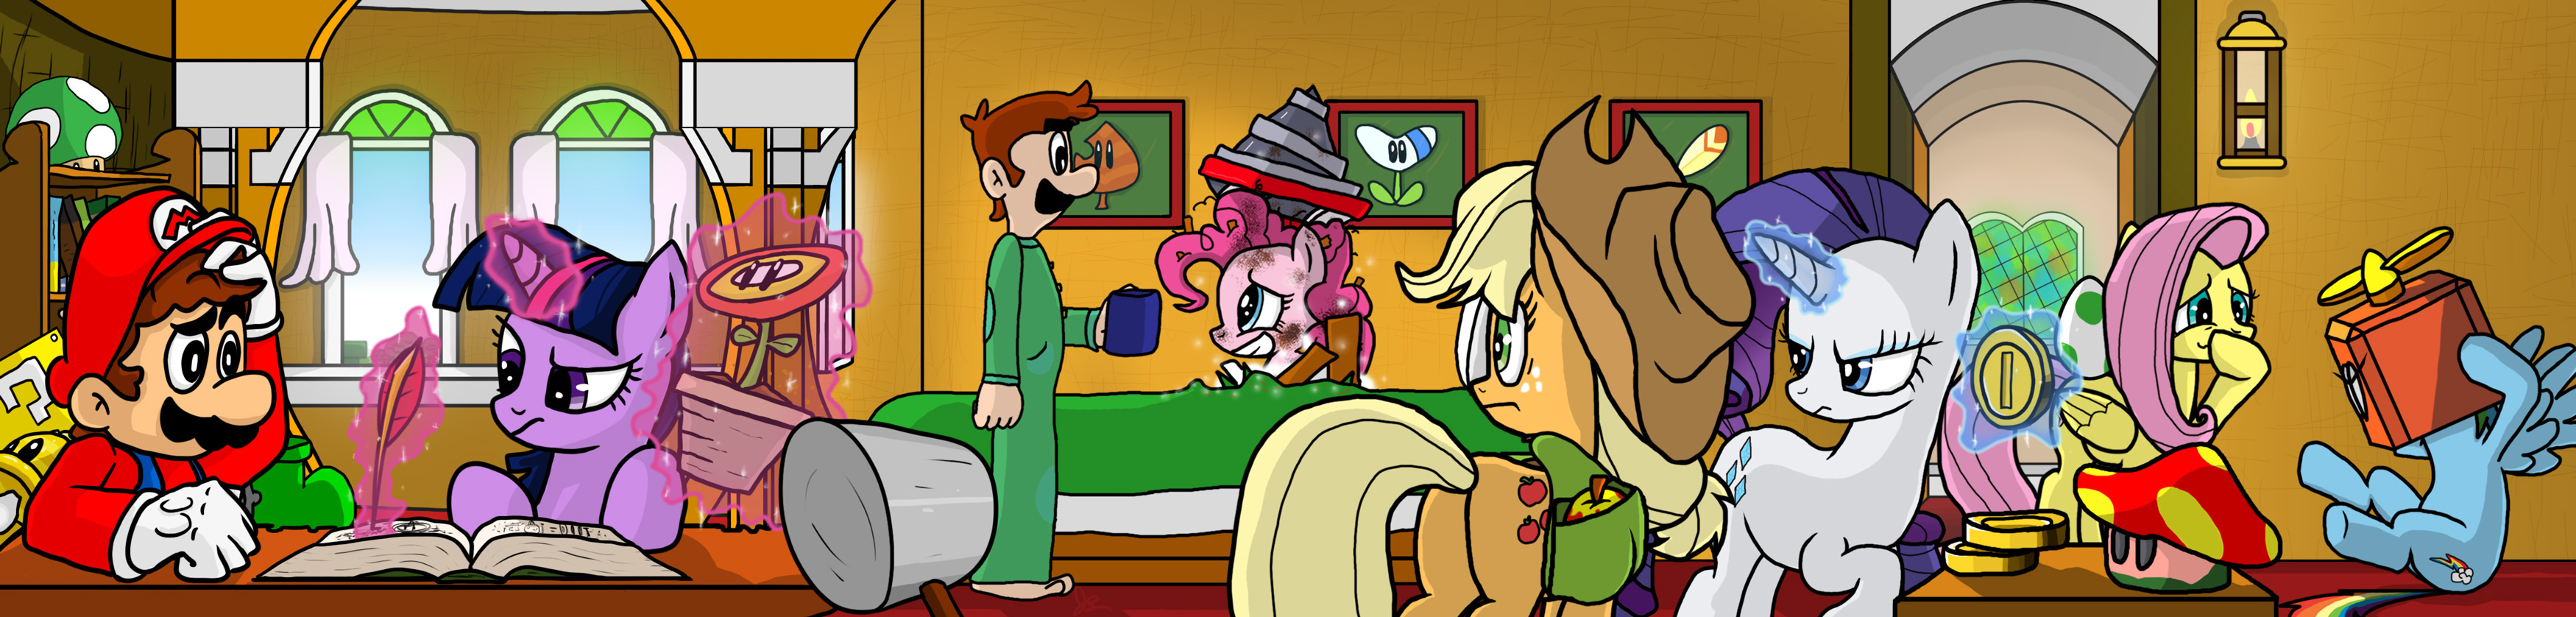 smb_mlp_powerup_discussion_by_s216barber